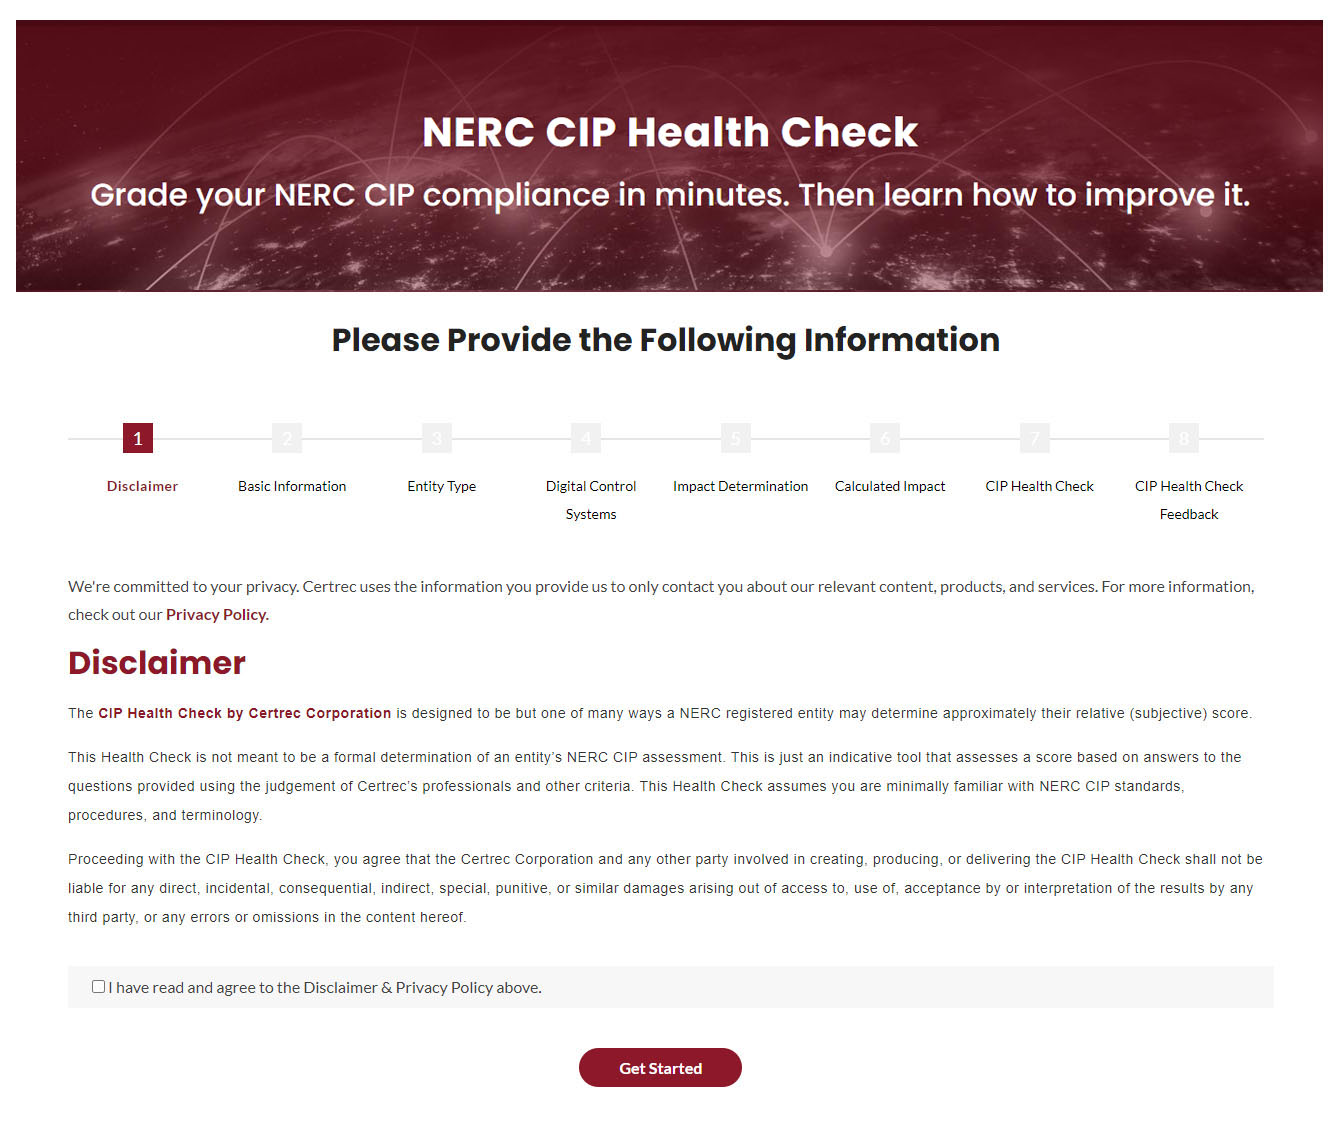 contact-cip-health-check-image-updated-v2